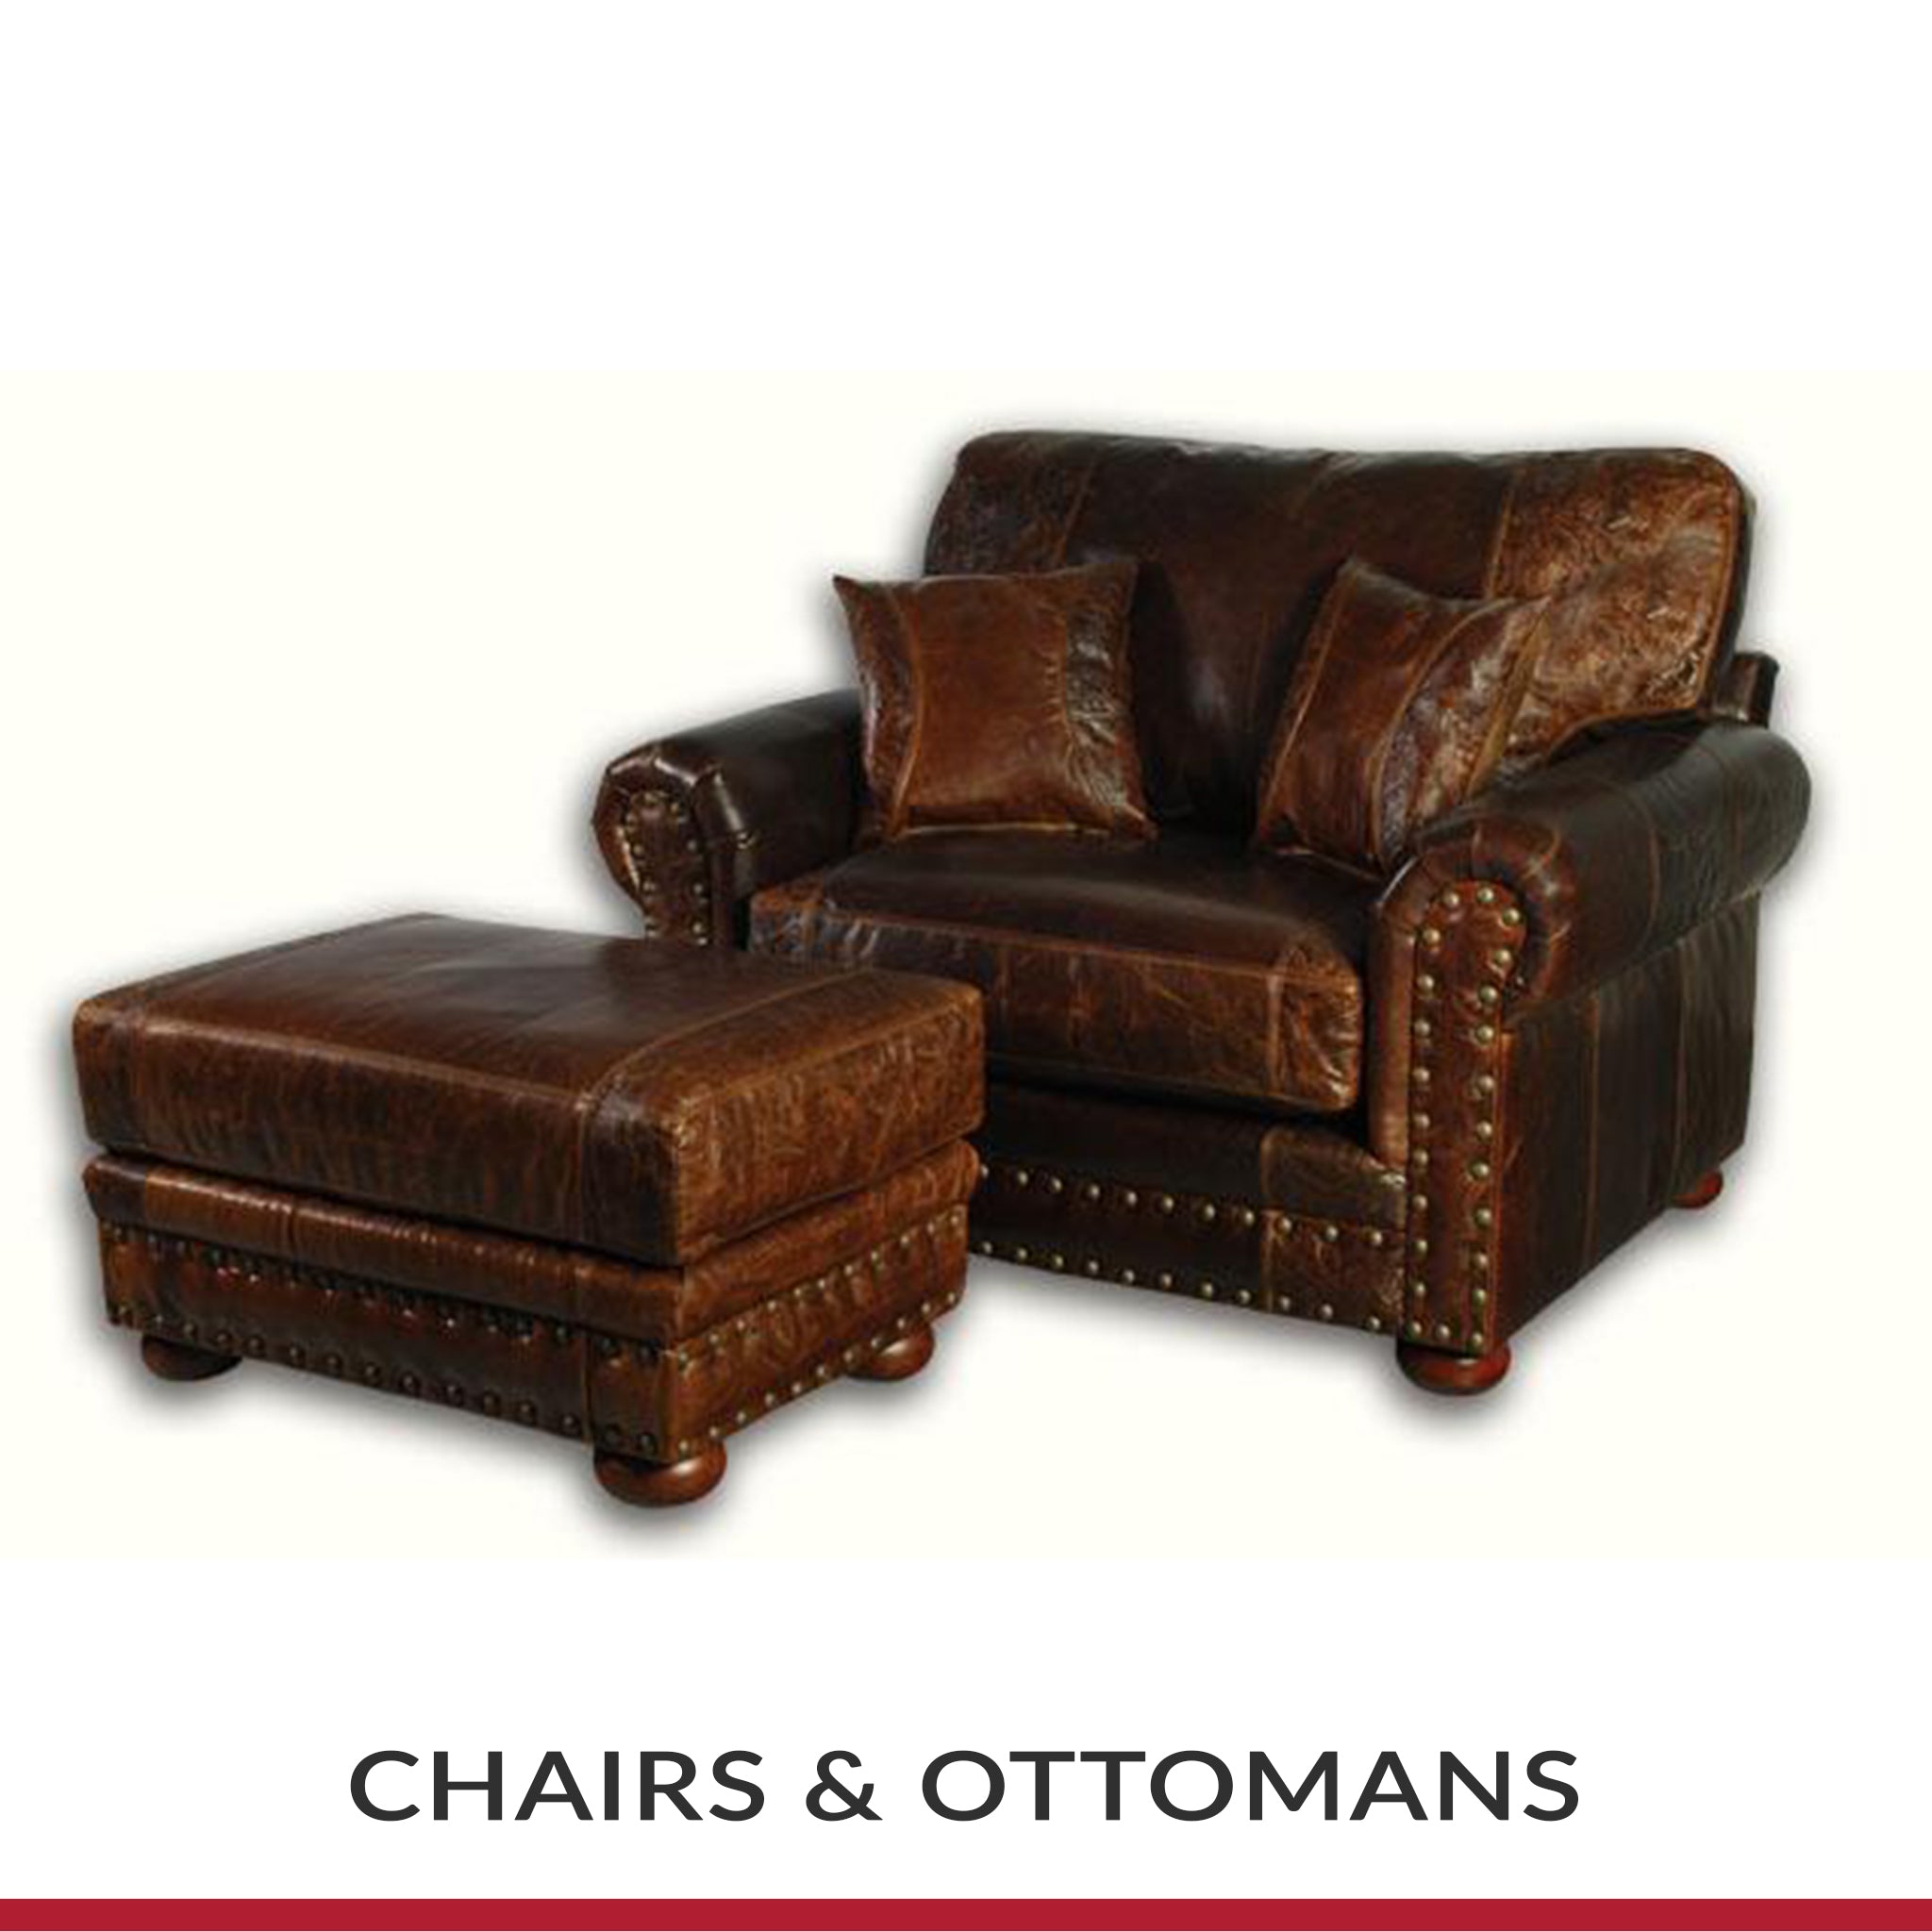 Chairs & Ottomans